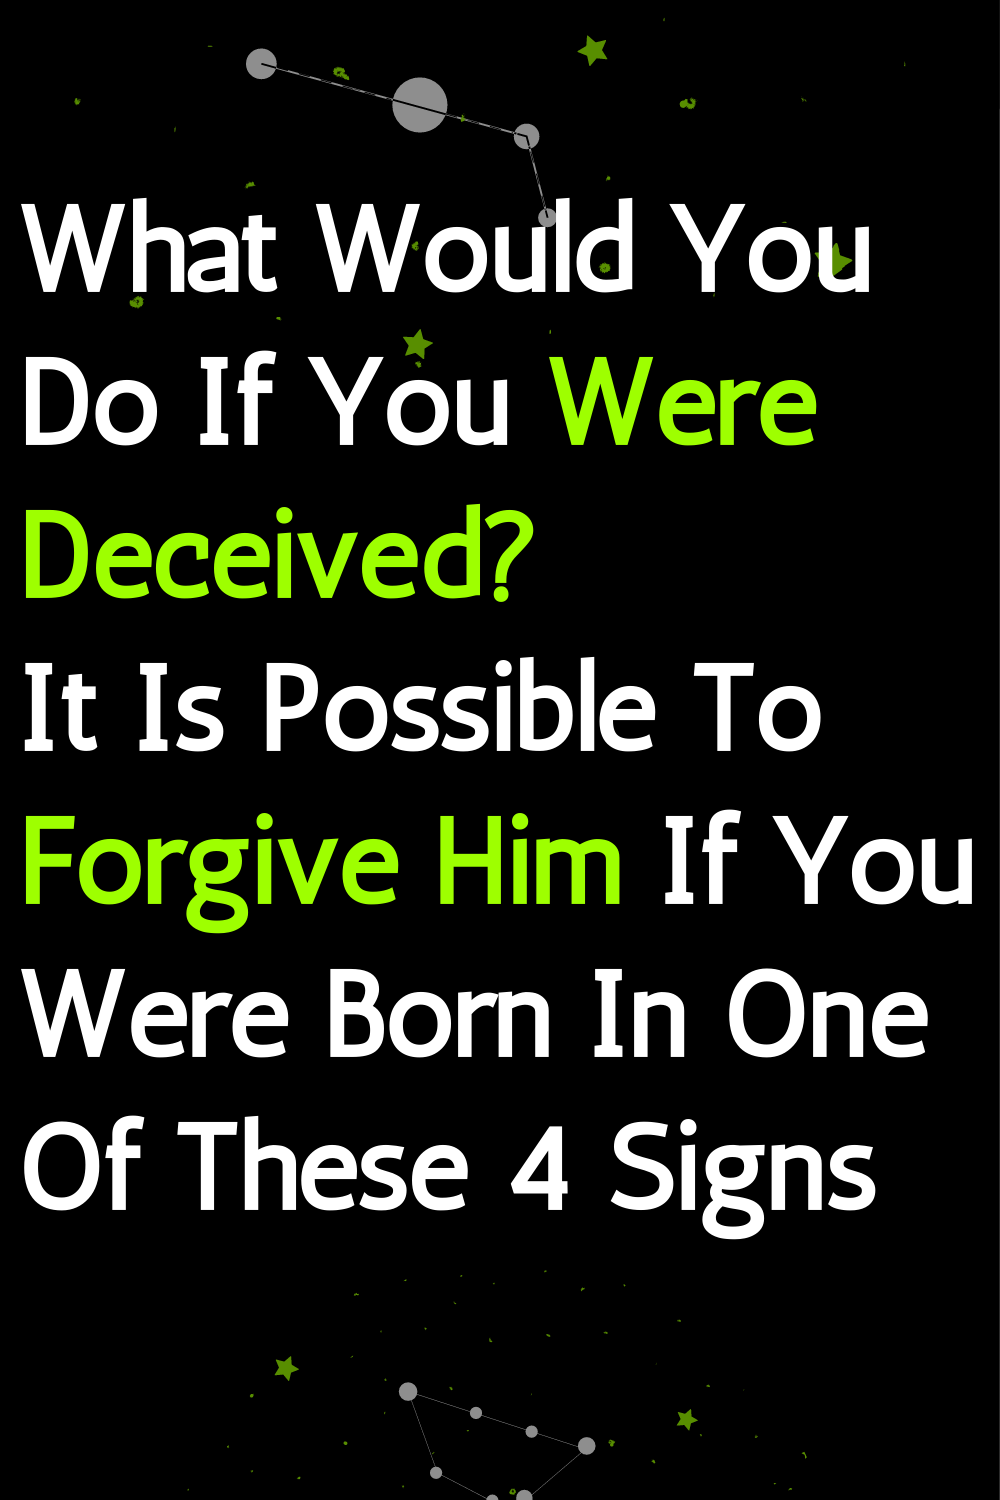 What Would You Do If You Were Deceived? It Is Possible To Forgive Him If You Were Born In One Of These 4 Signs